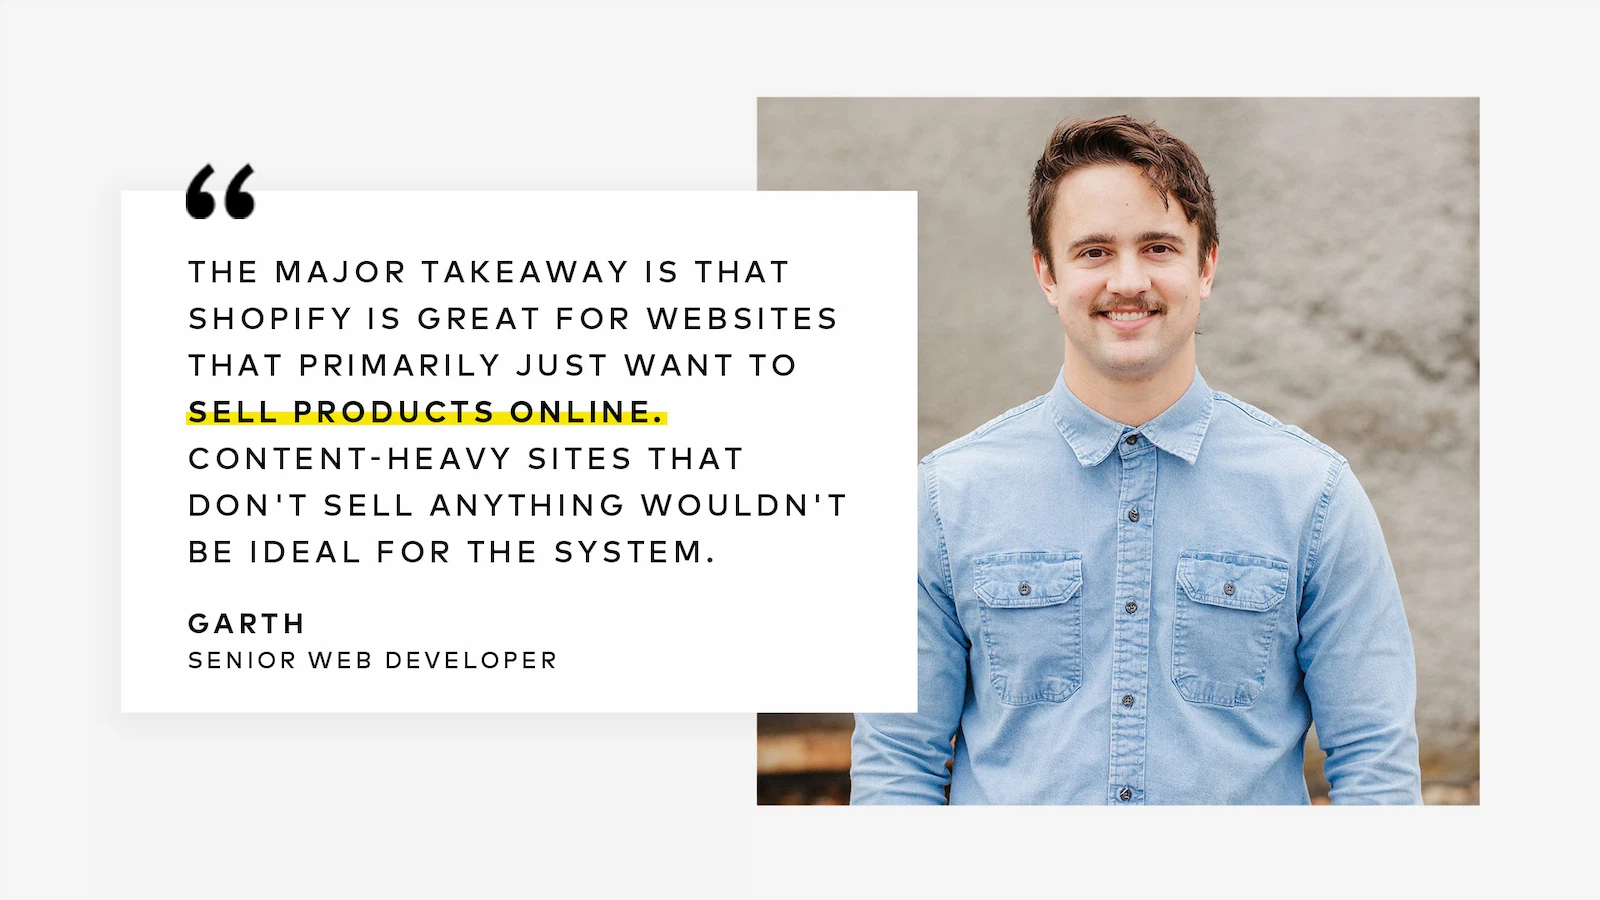 The major takeaway is that Shopify is great for websites that primarily just want to sell products online. Content-heavy sites that don't sell anything wouldn't be ideal for the system.